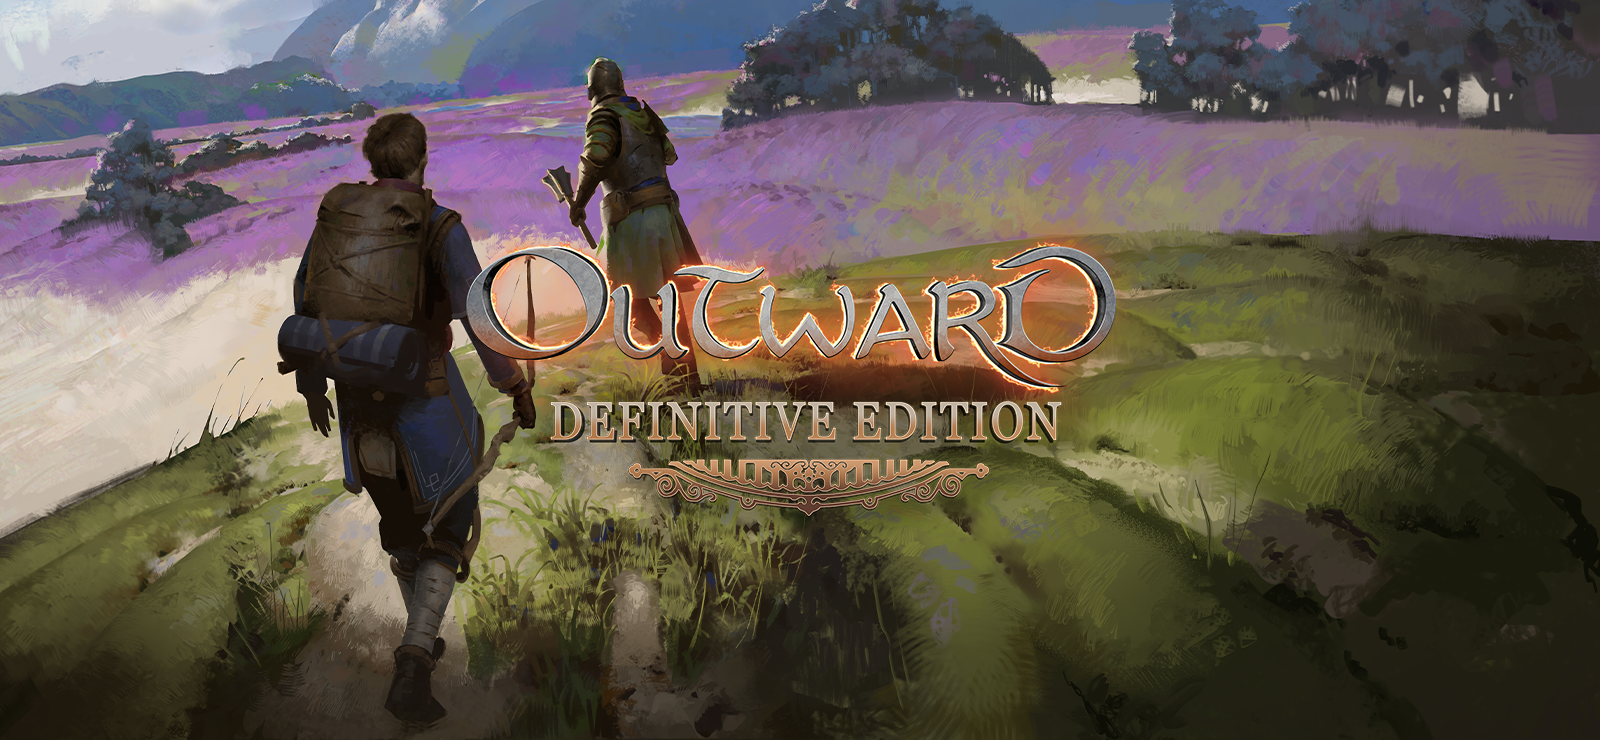 Outward Definitive Edition free download